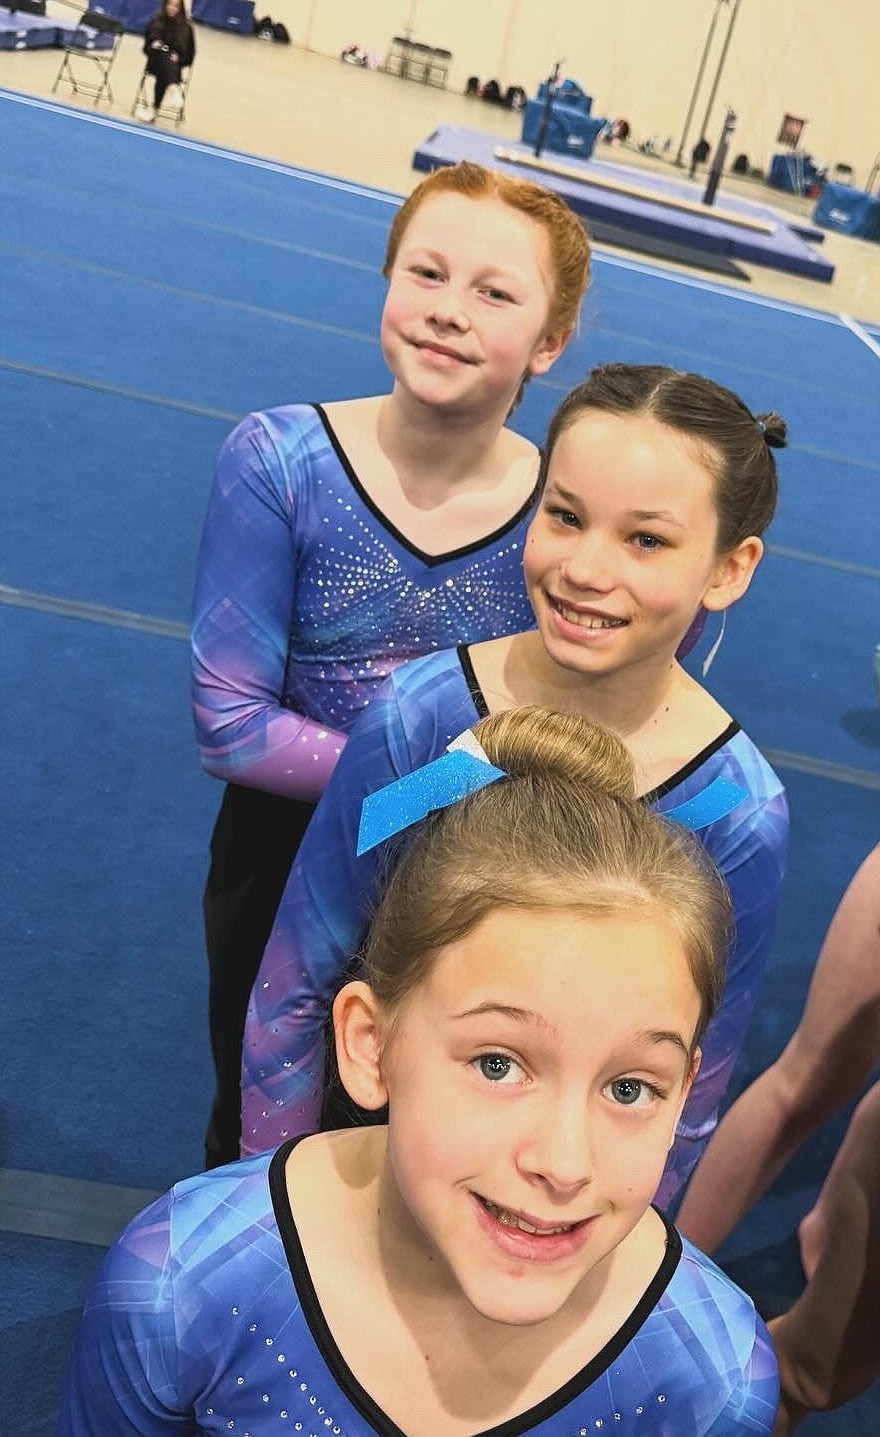 Courtesy photo
GEMS Athletic Center Silver Session 4 at the state Xcel gymnastics championships March 22-24 in Boise. From front to back are Riley Krebs, Kalea Pham and Emma Linder.